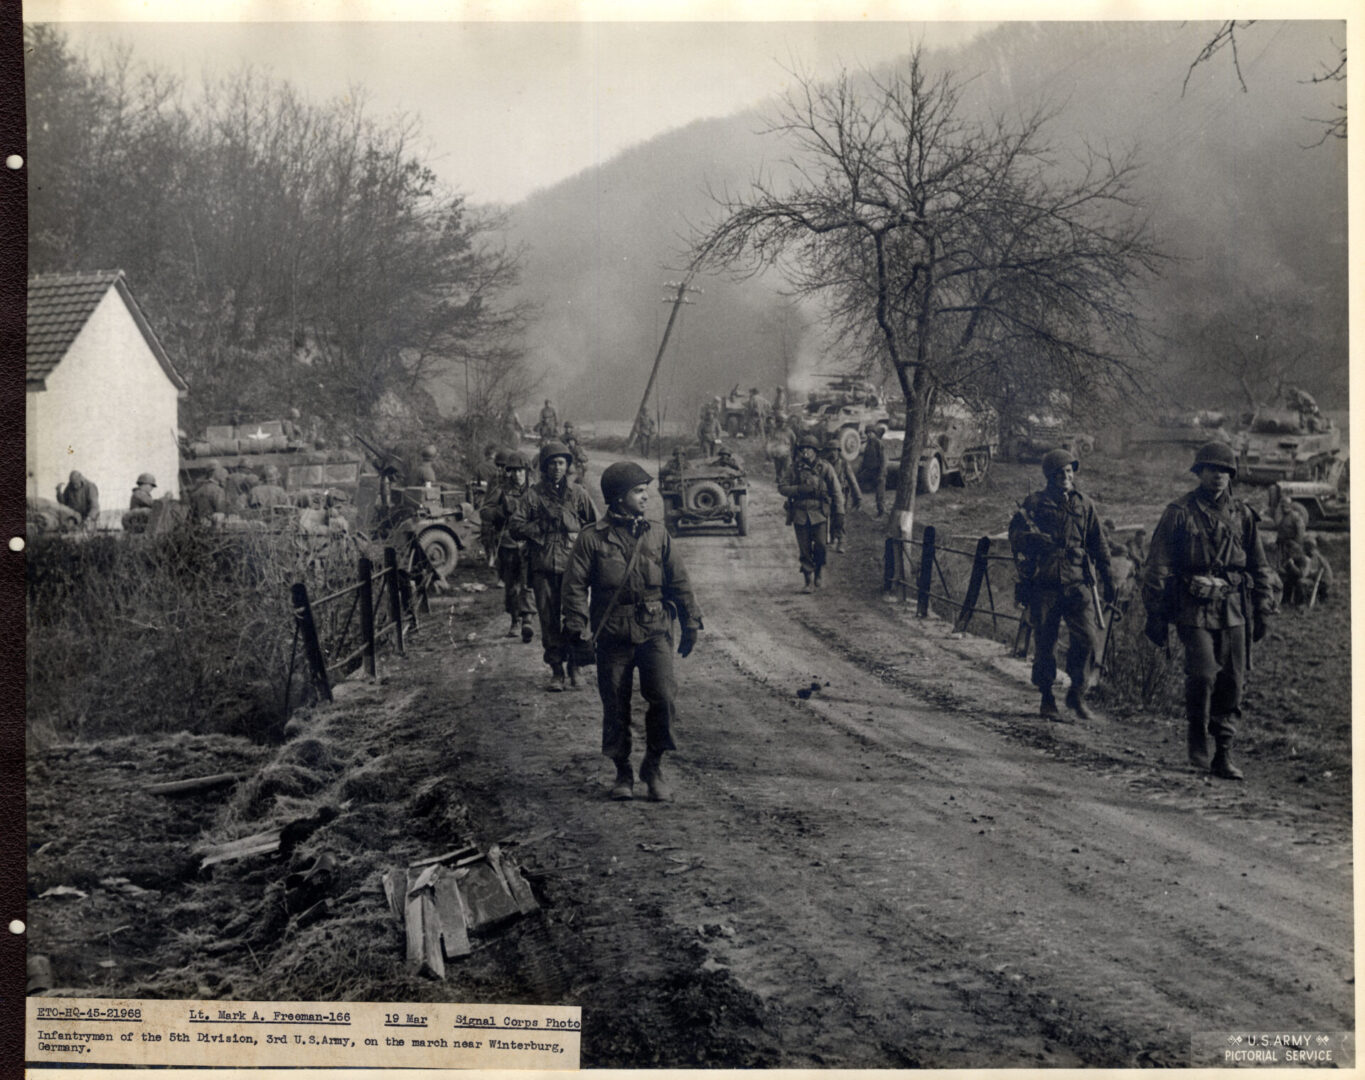 Infantrymen march towards the town of Winterburg